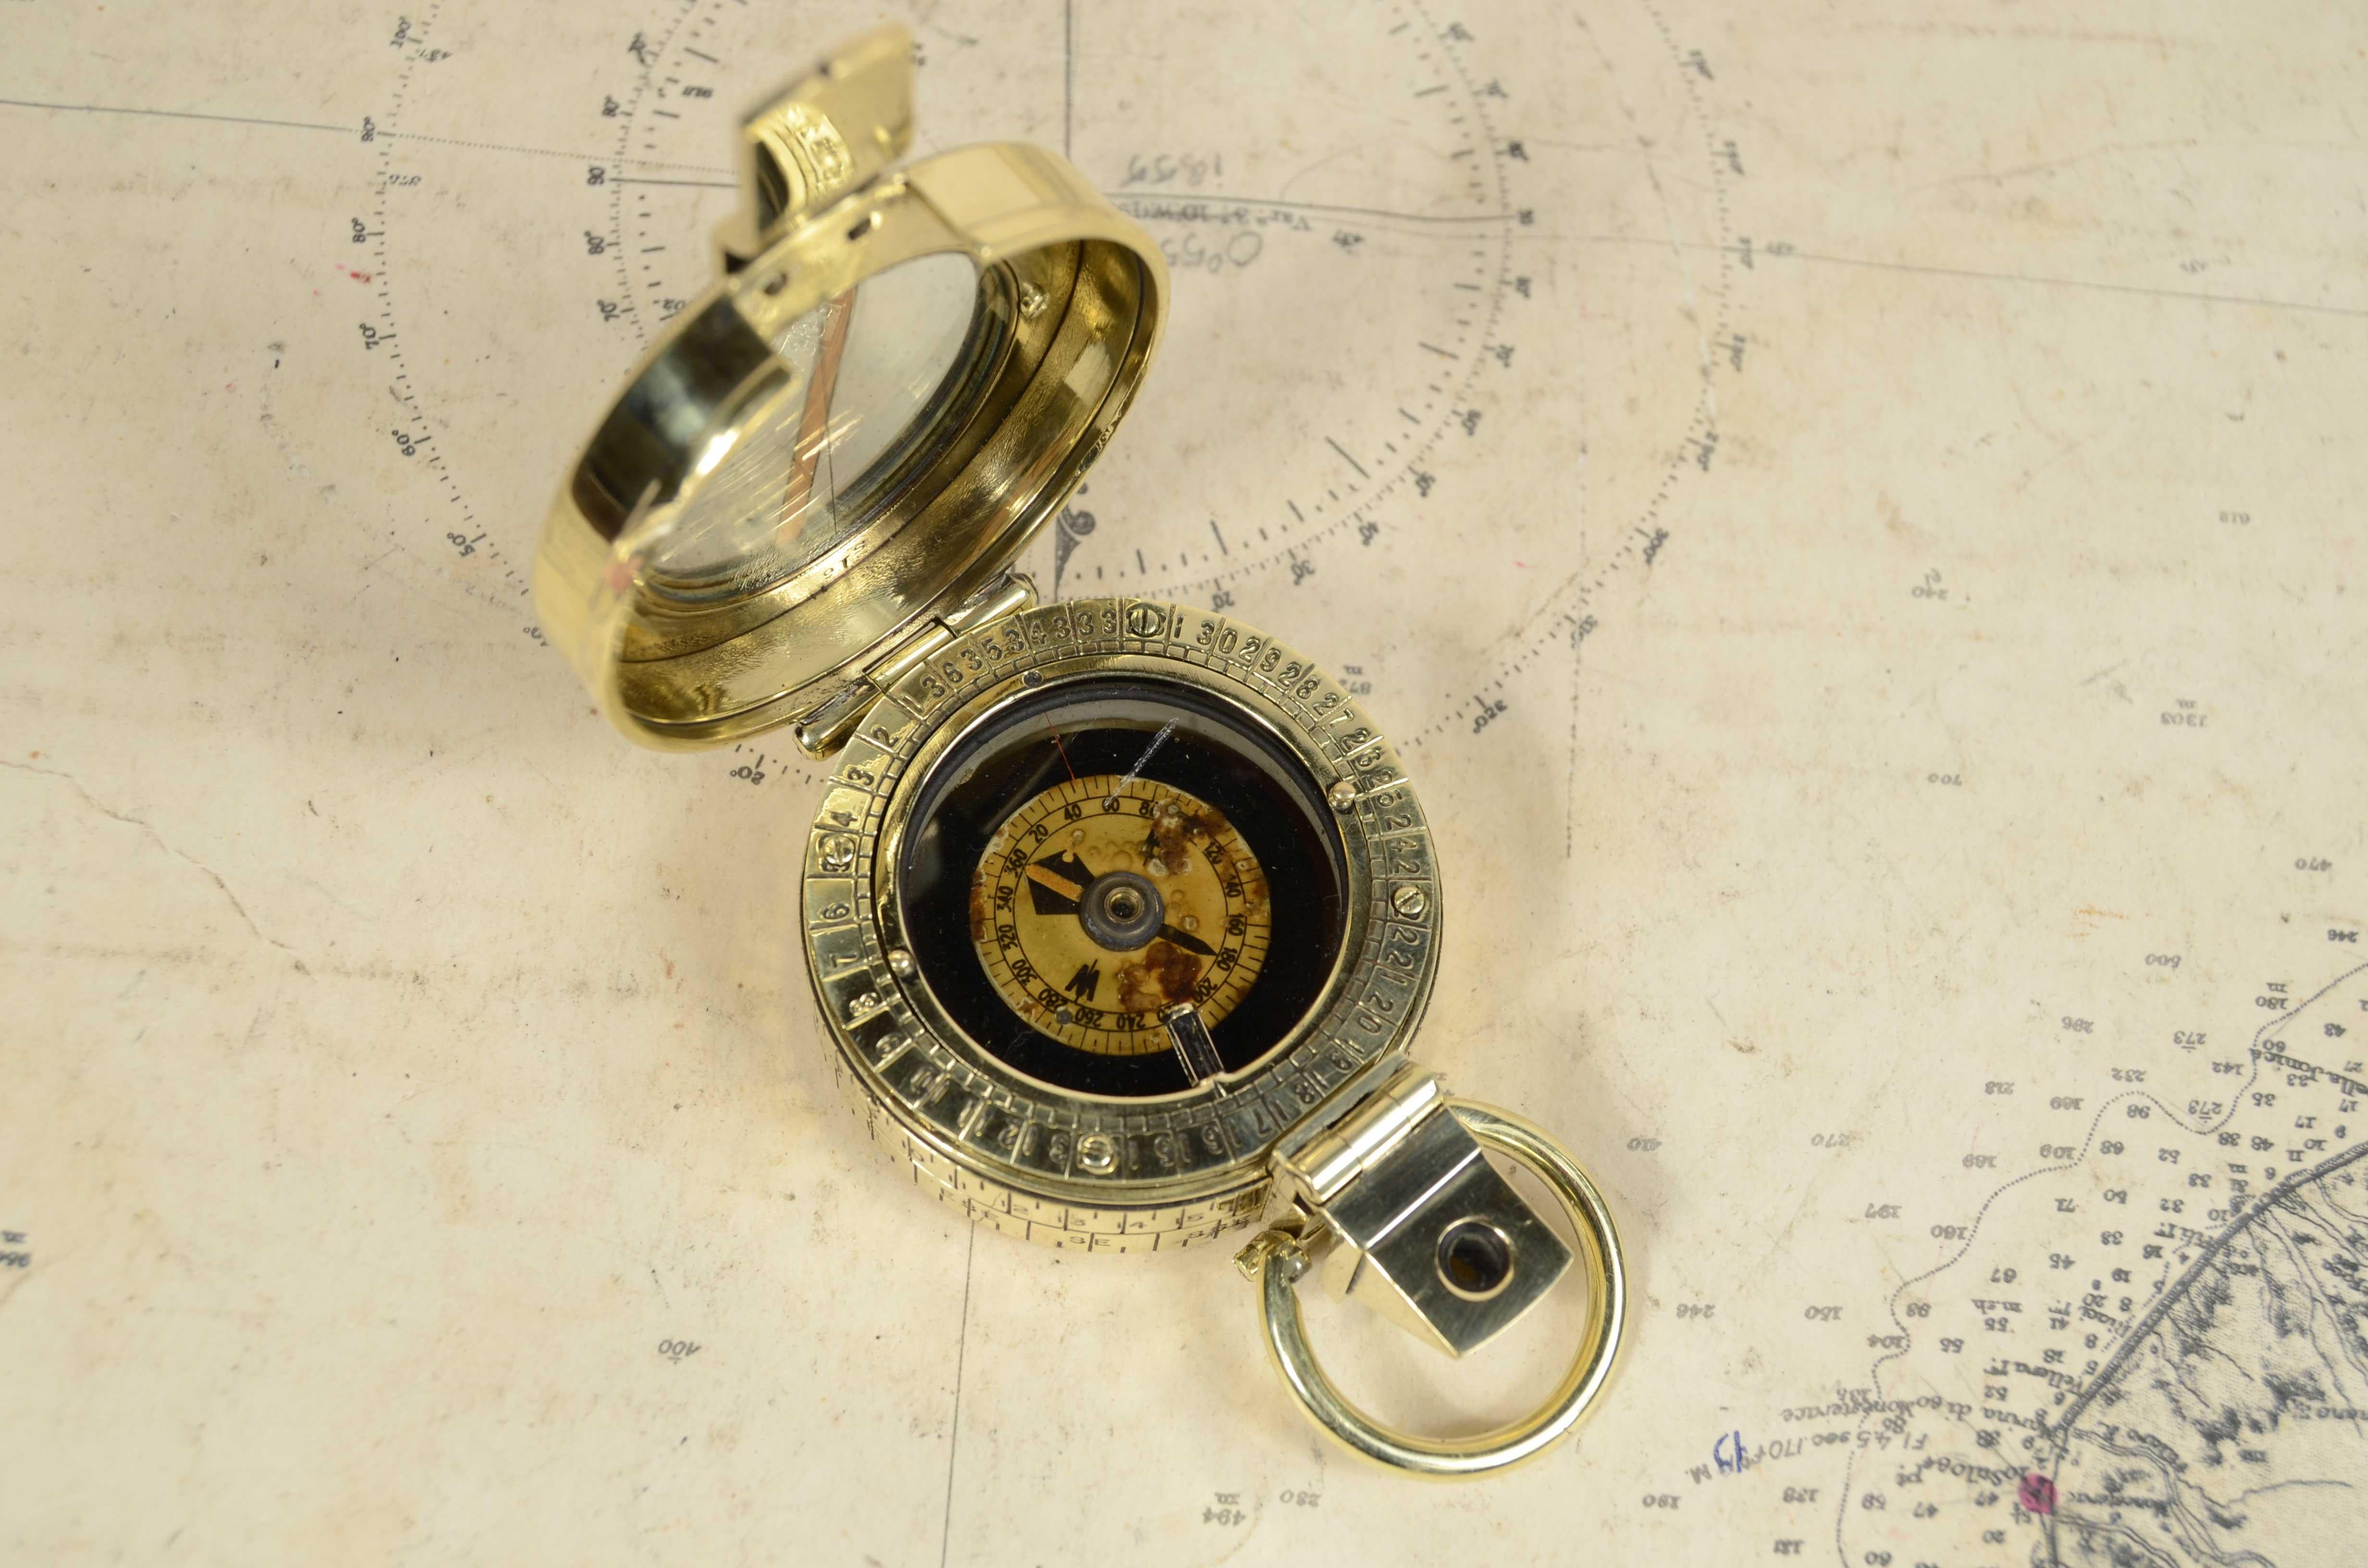 Prismatic compass  pocket  liquid and sensing signed F. Barker's & Son Makers London 1917, Pat No.29677/10, Futher Pat Pending,  in use by British army officers during World War I. This is a small vintage compass typically used in recreational